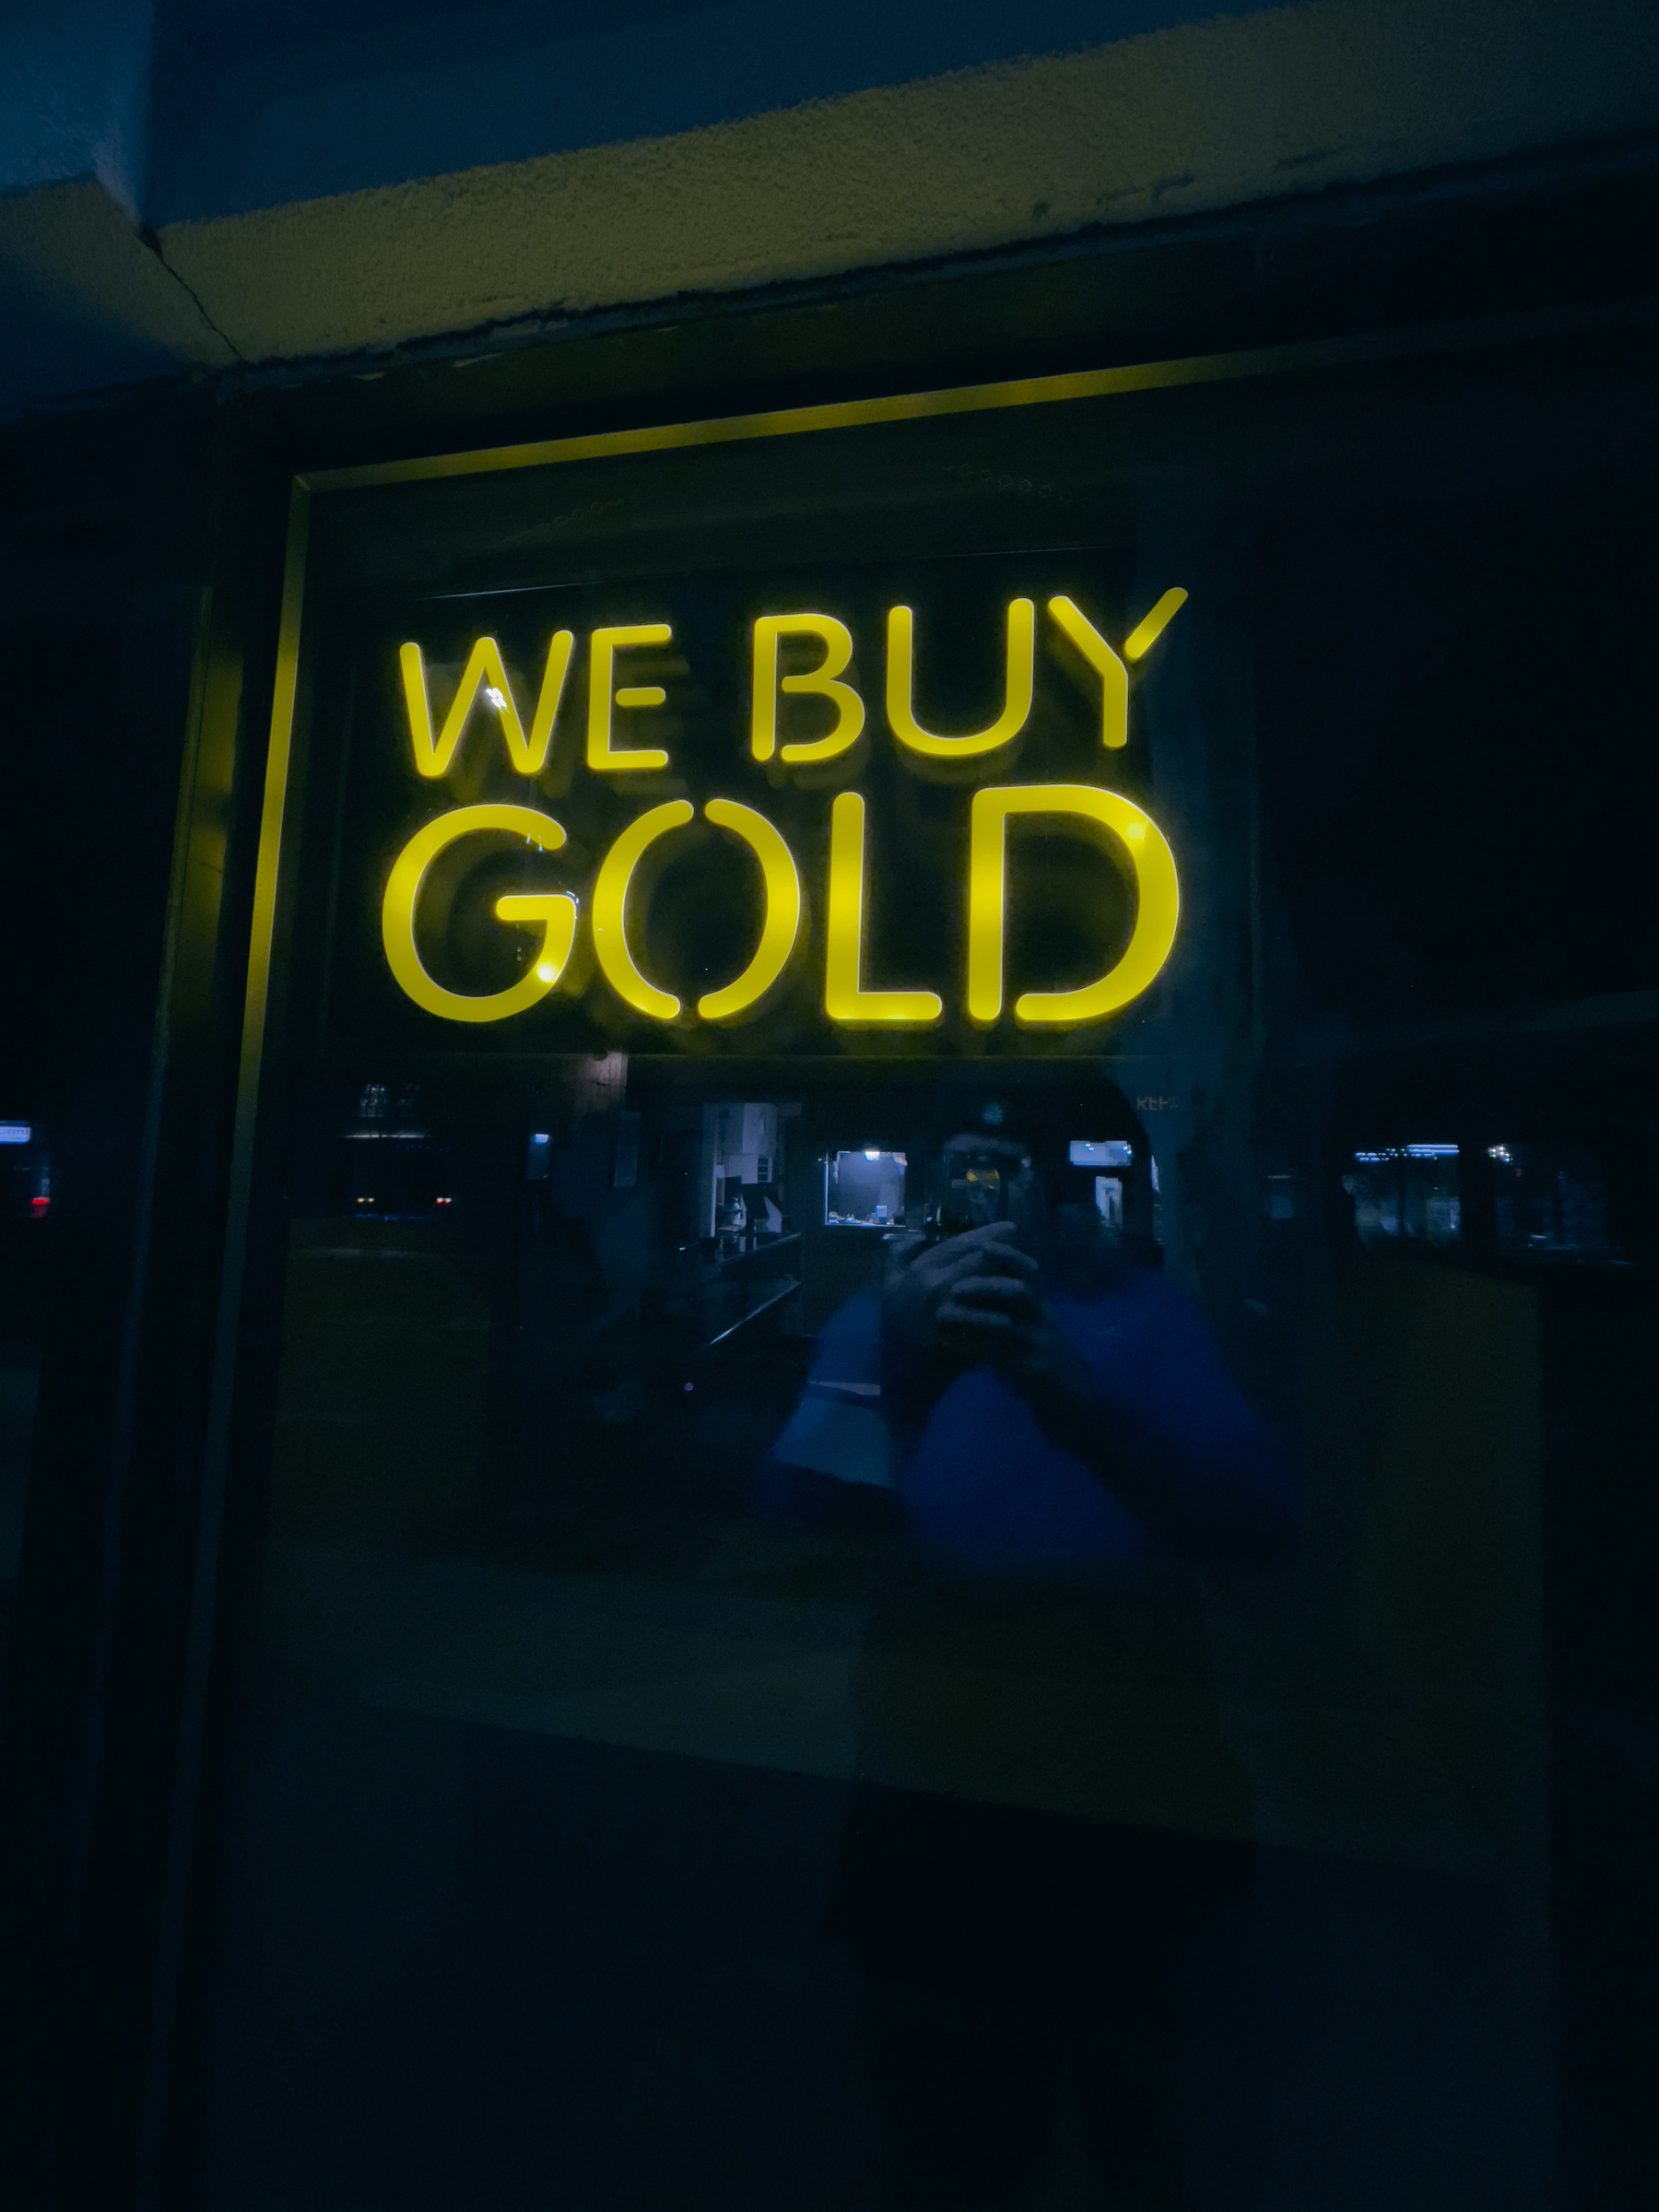 Illuminated “WE BUY GOLD” sign in shop window.